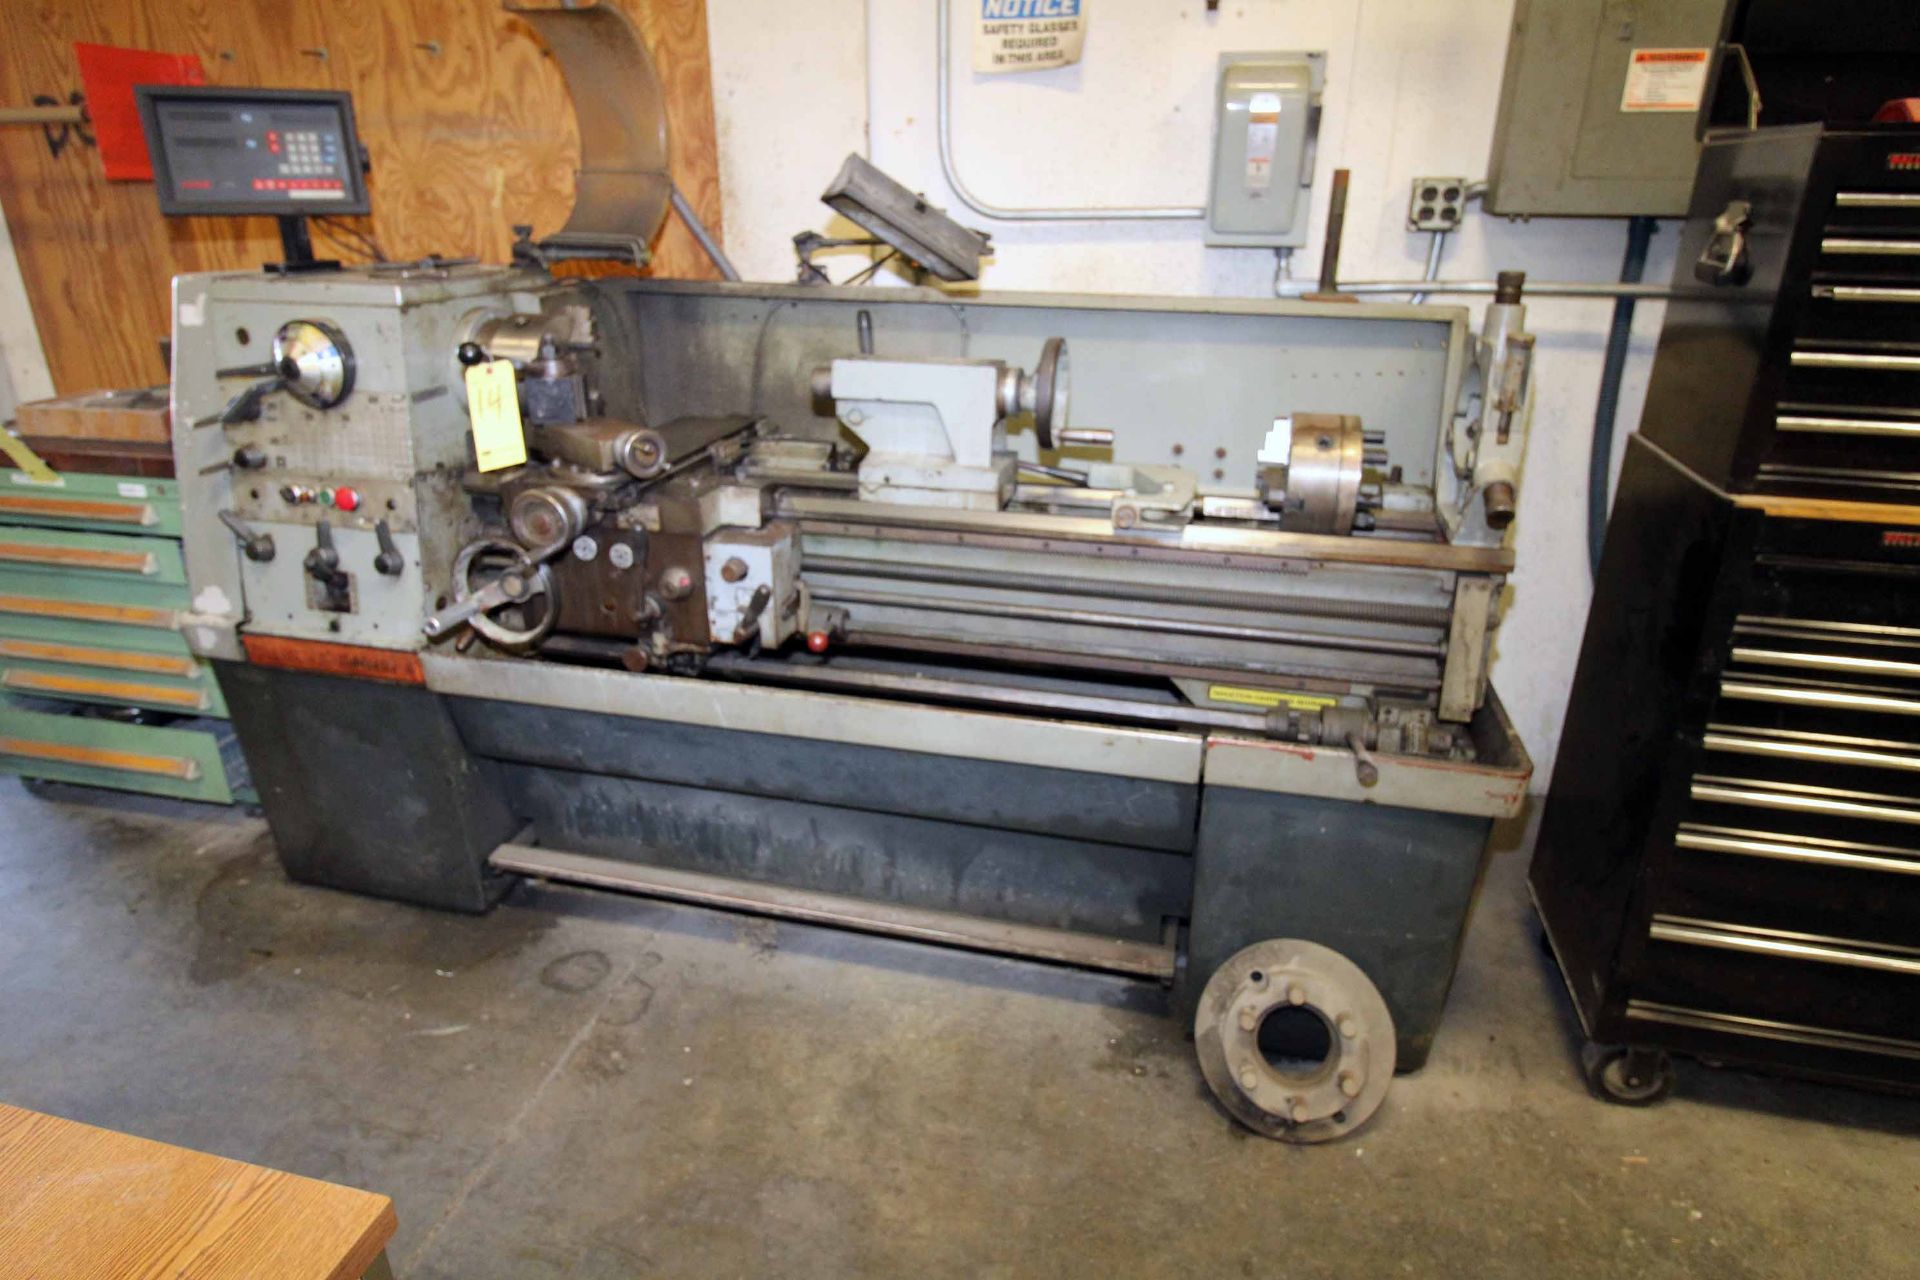 ENGINE LATHE, CLAUSING COLCHESTER 15” X 50”, Newall D.R.O., taper attach., steadyrest, rotating